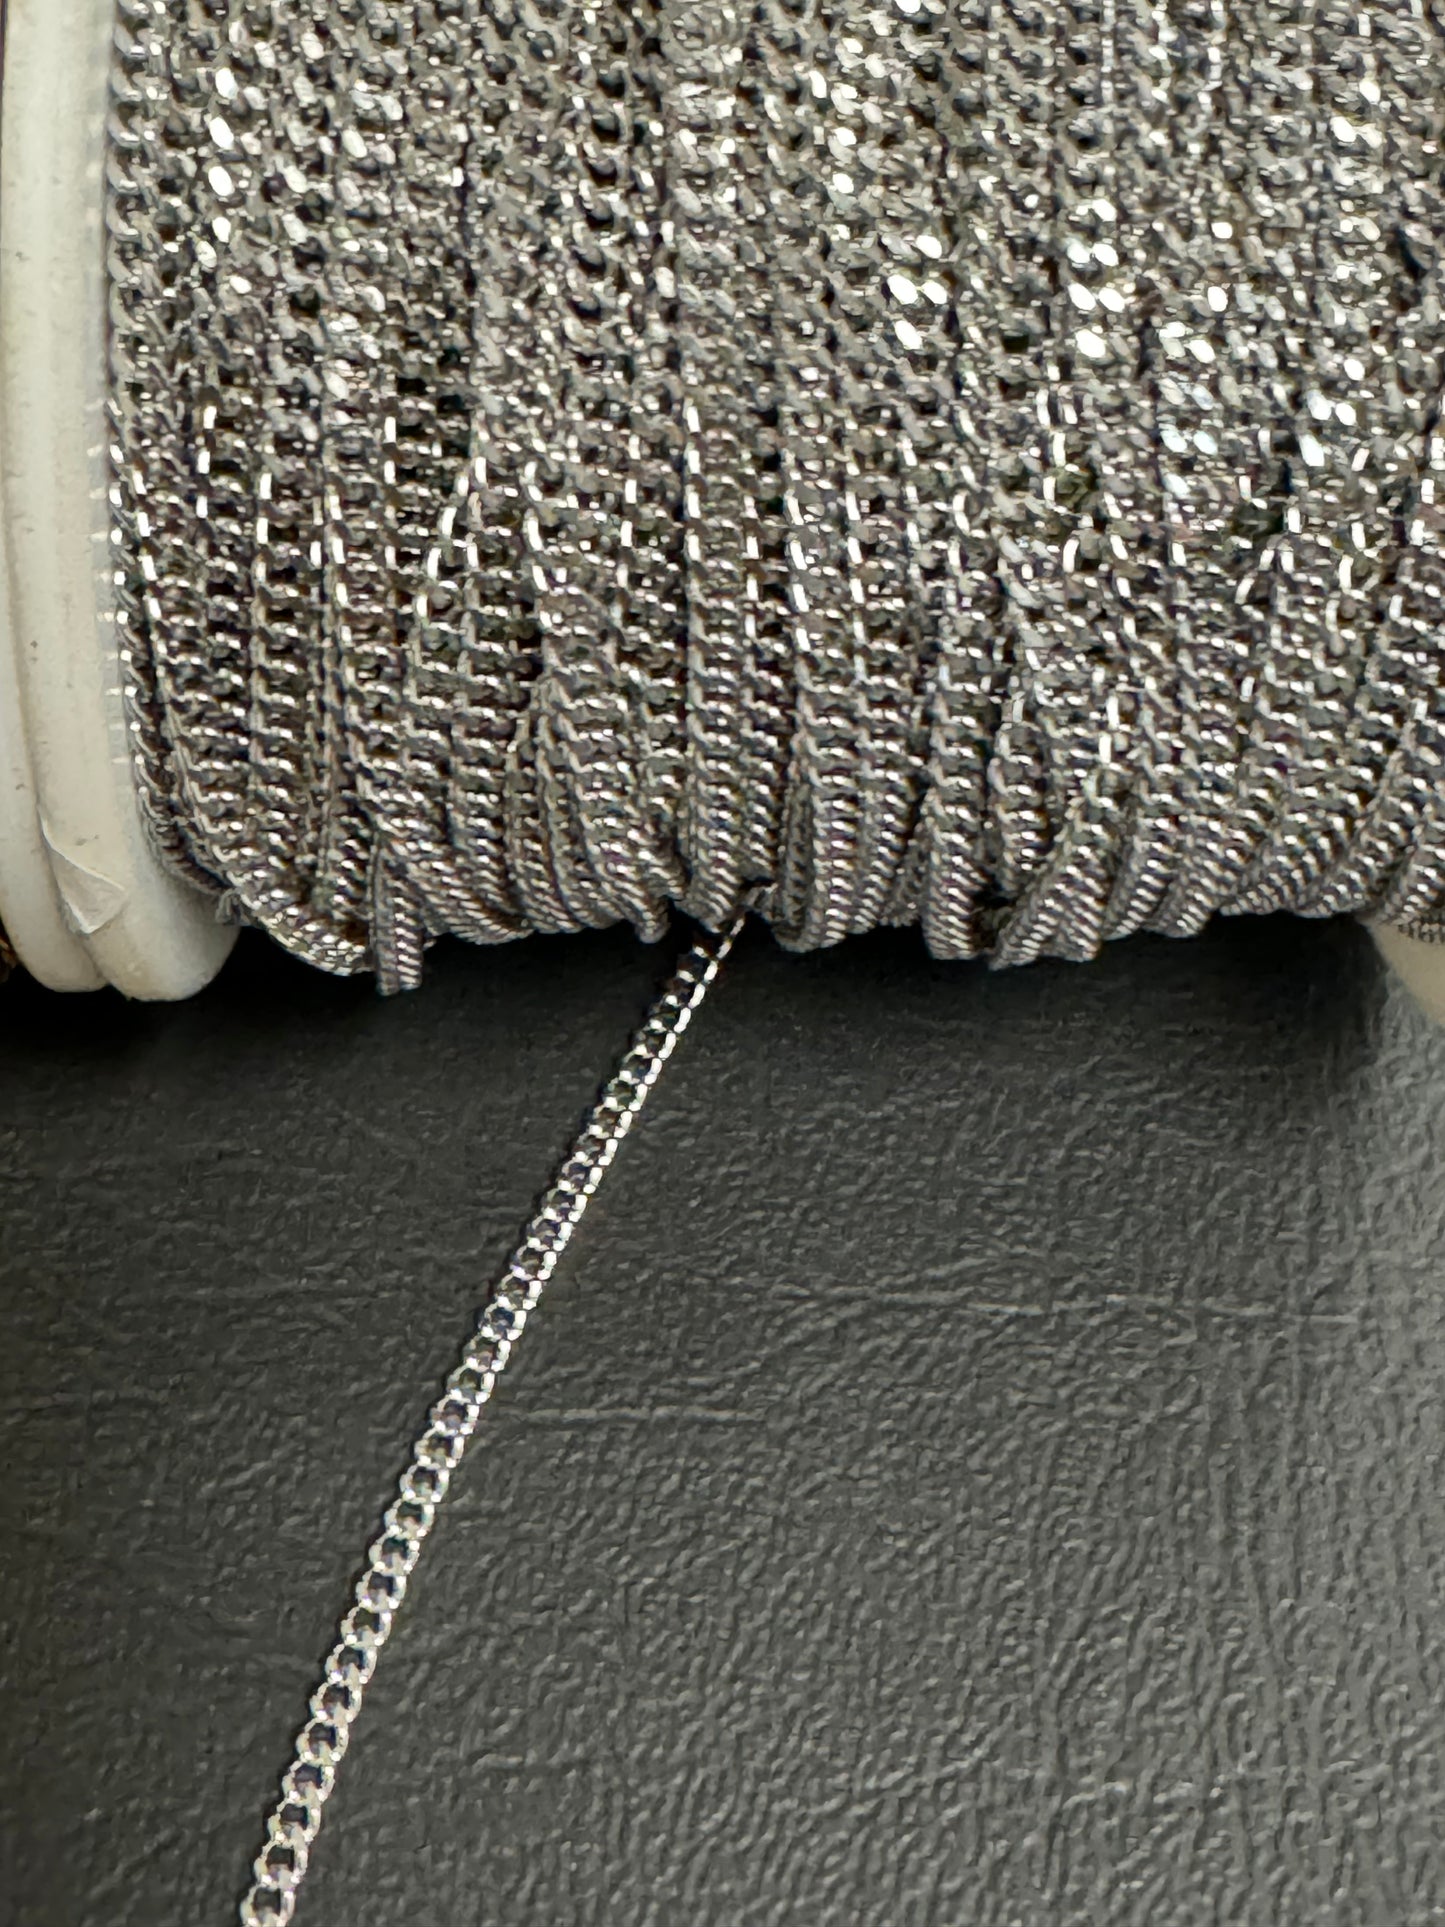 Stainless Steel Cuban Link Chain